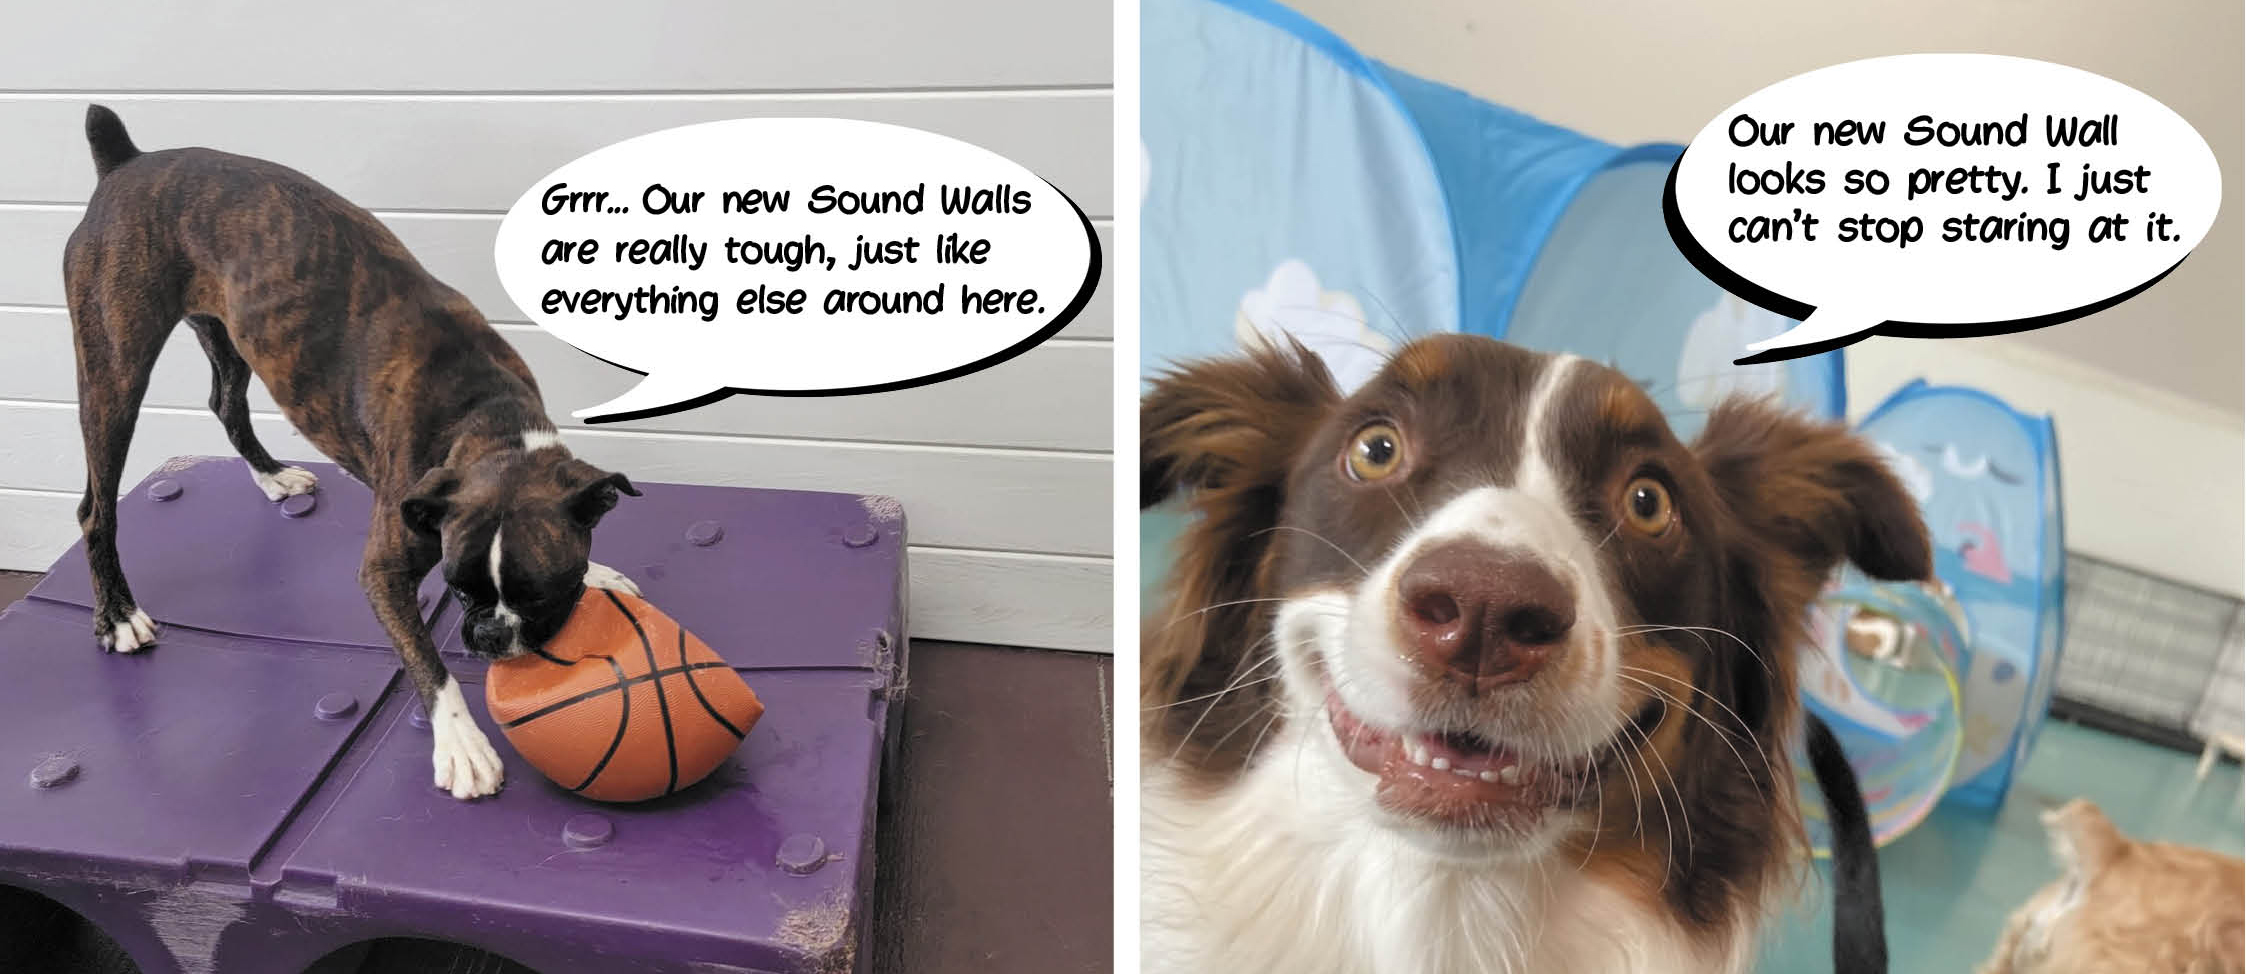 Dog playing with ball by sound wall and dog staring at dog daycare